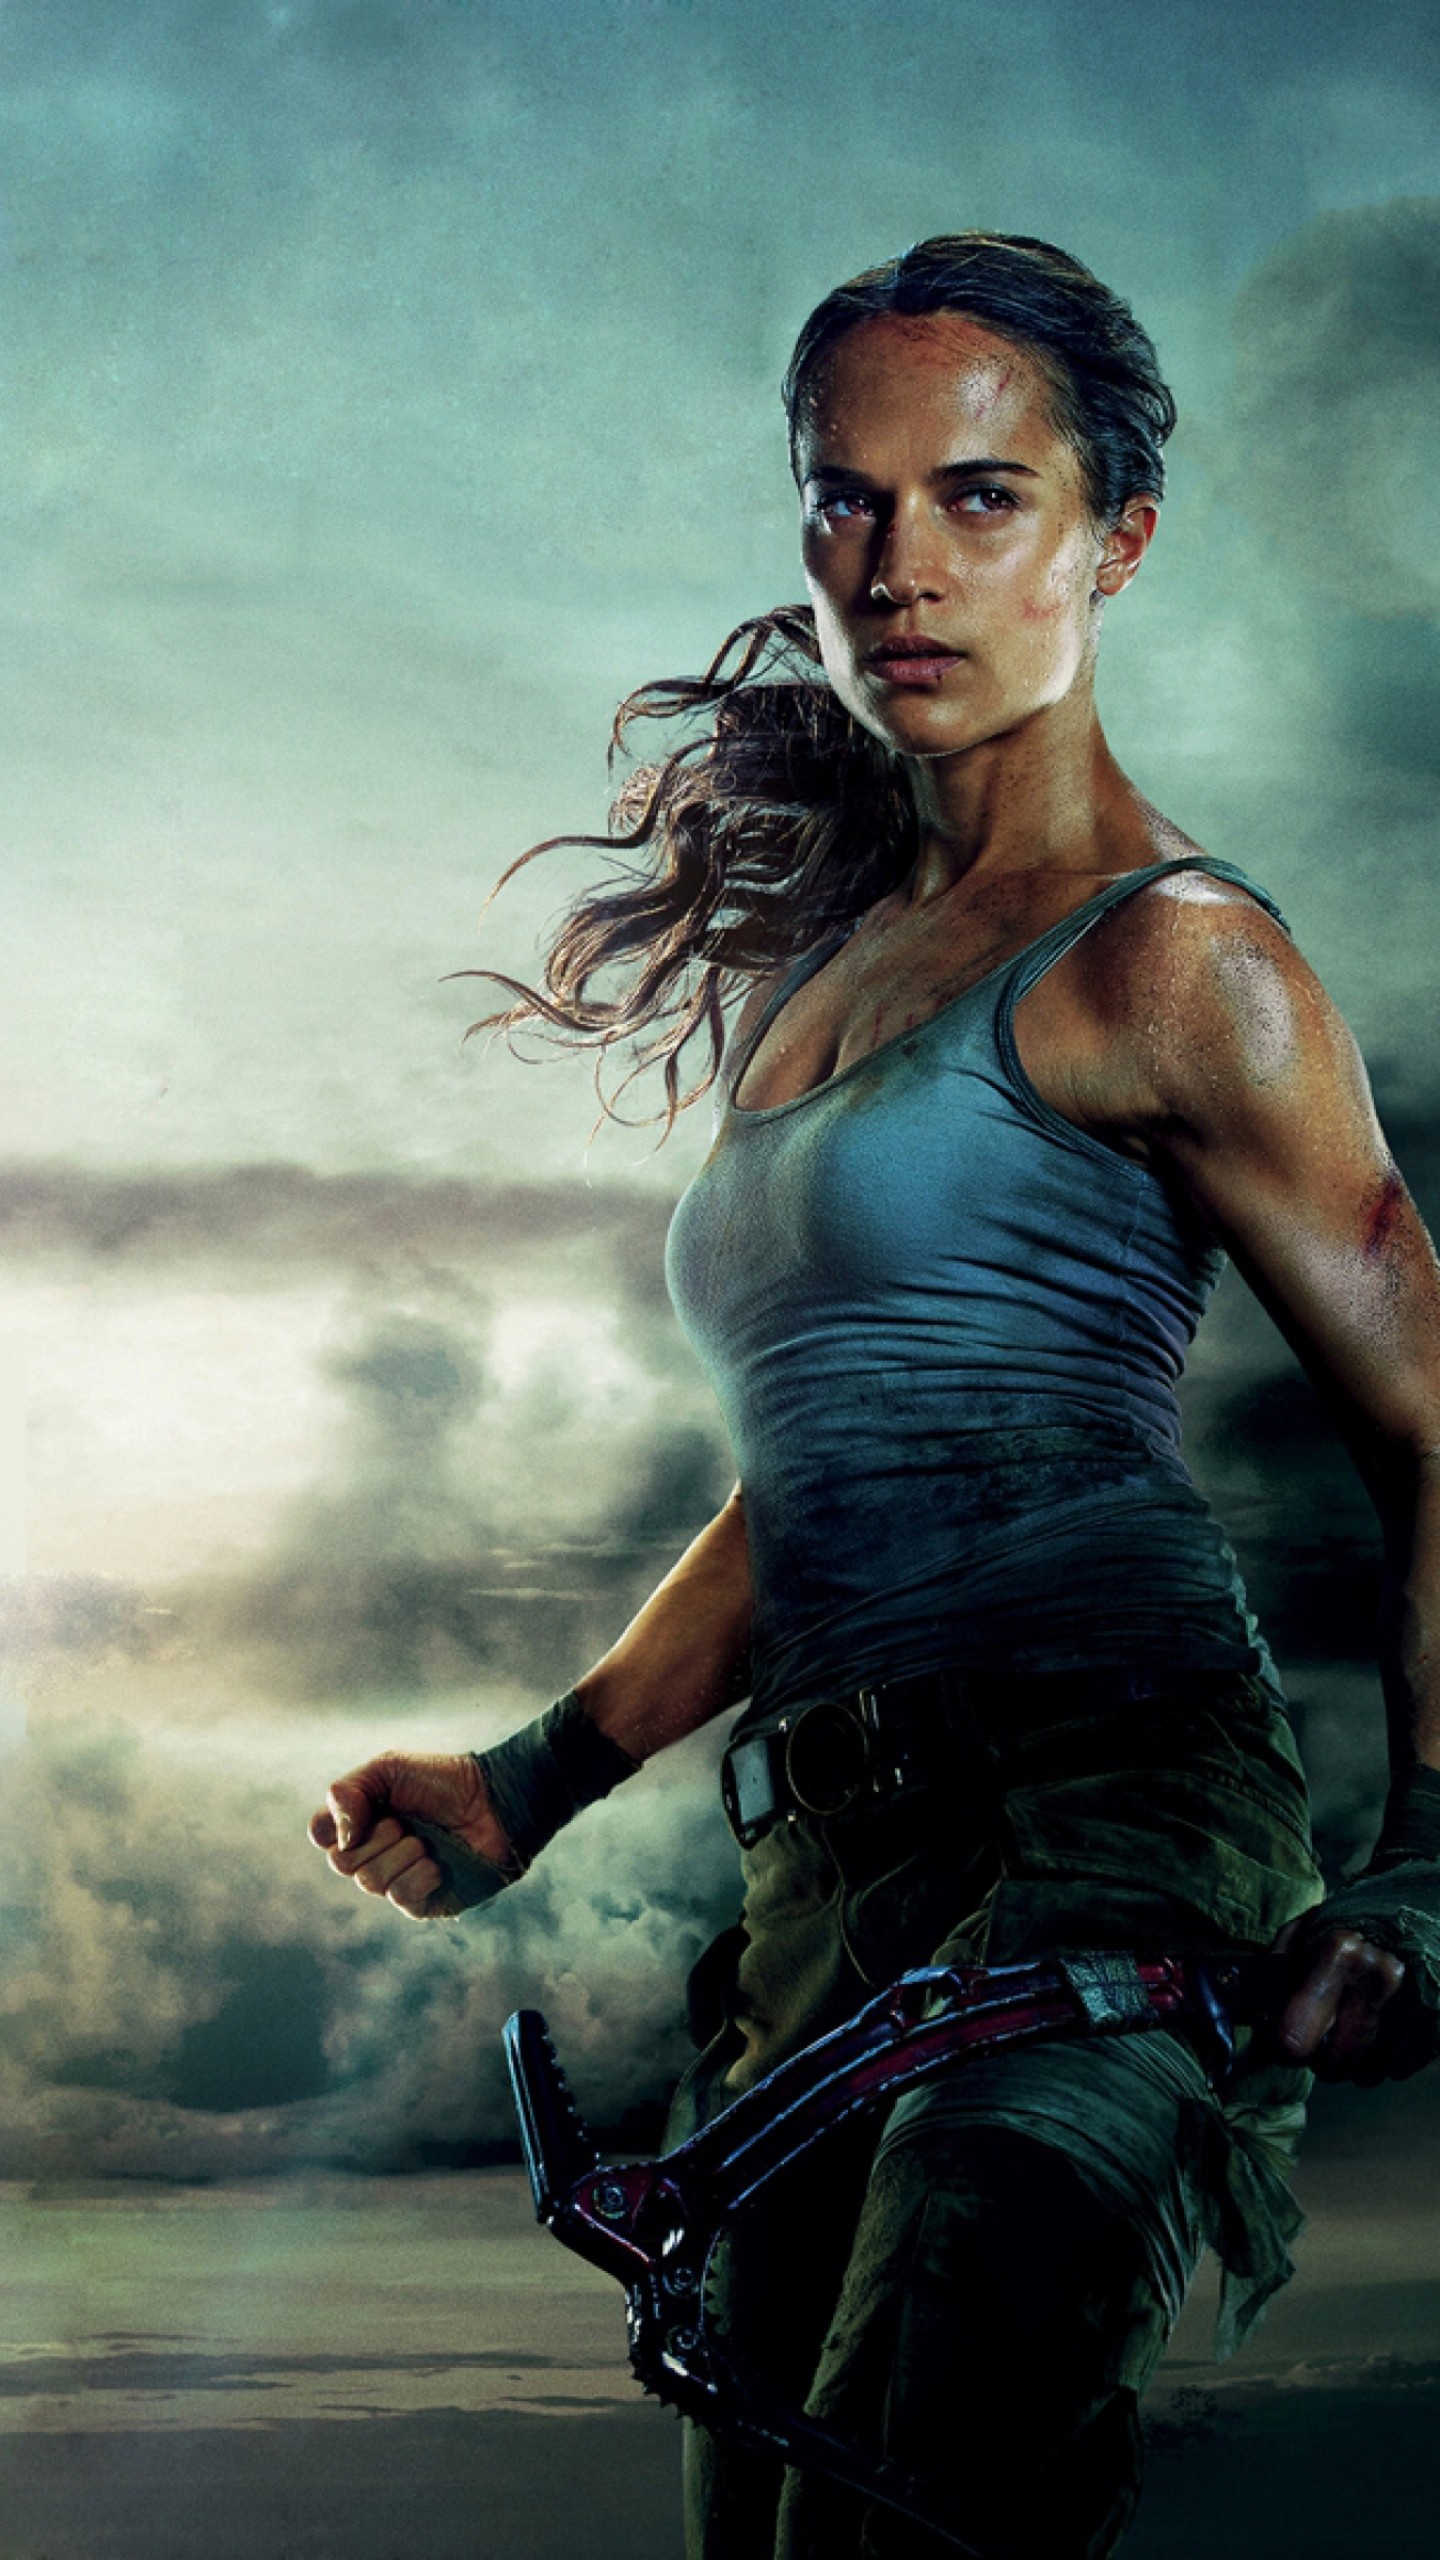 Lara Croft (Movie): Determined to solve the mystery behind her father's disappearance. 1440x2560 HD Background.